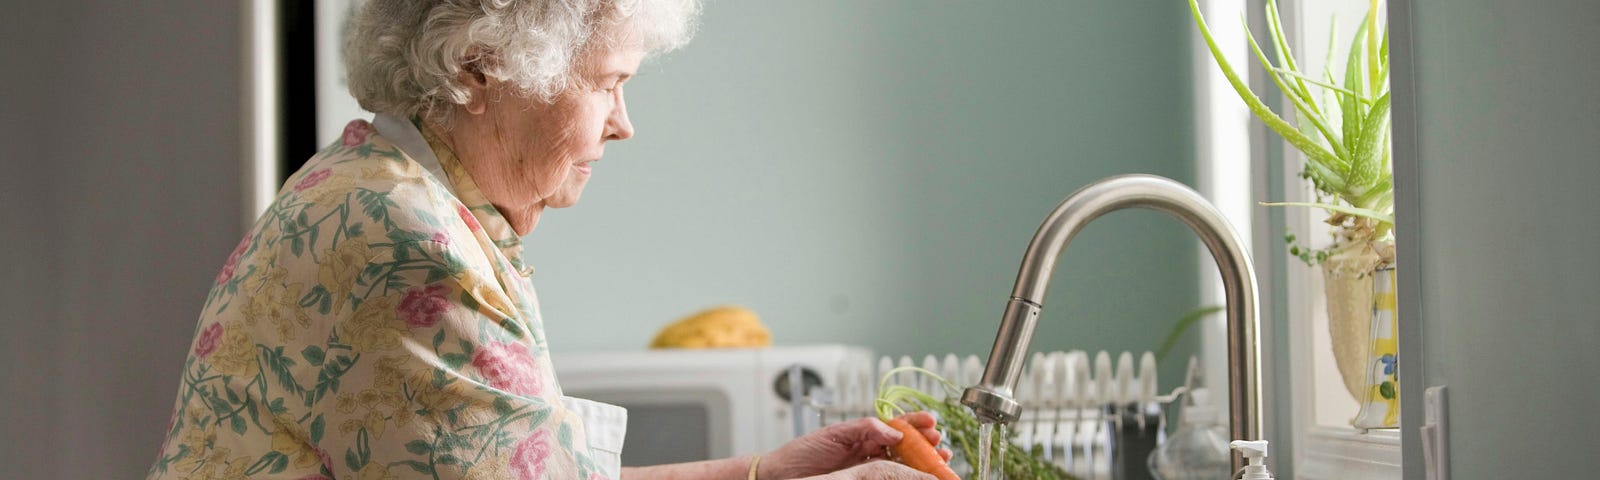 This is a photo of an elderly lady standing at a kitchen sink washing fresh vegetables.